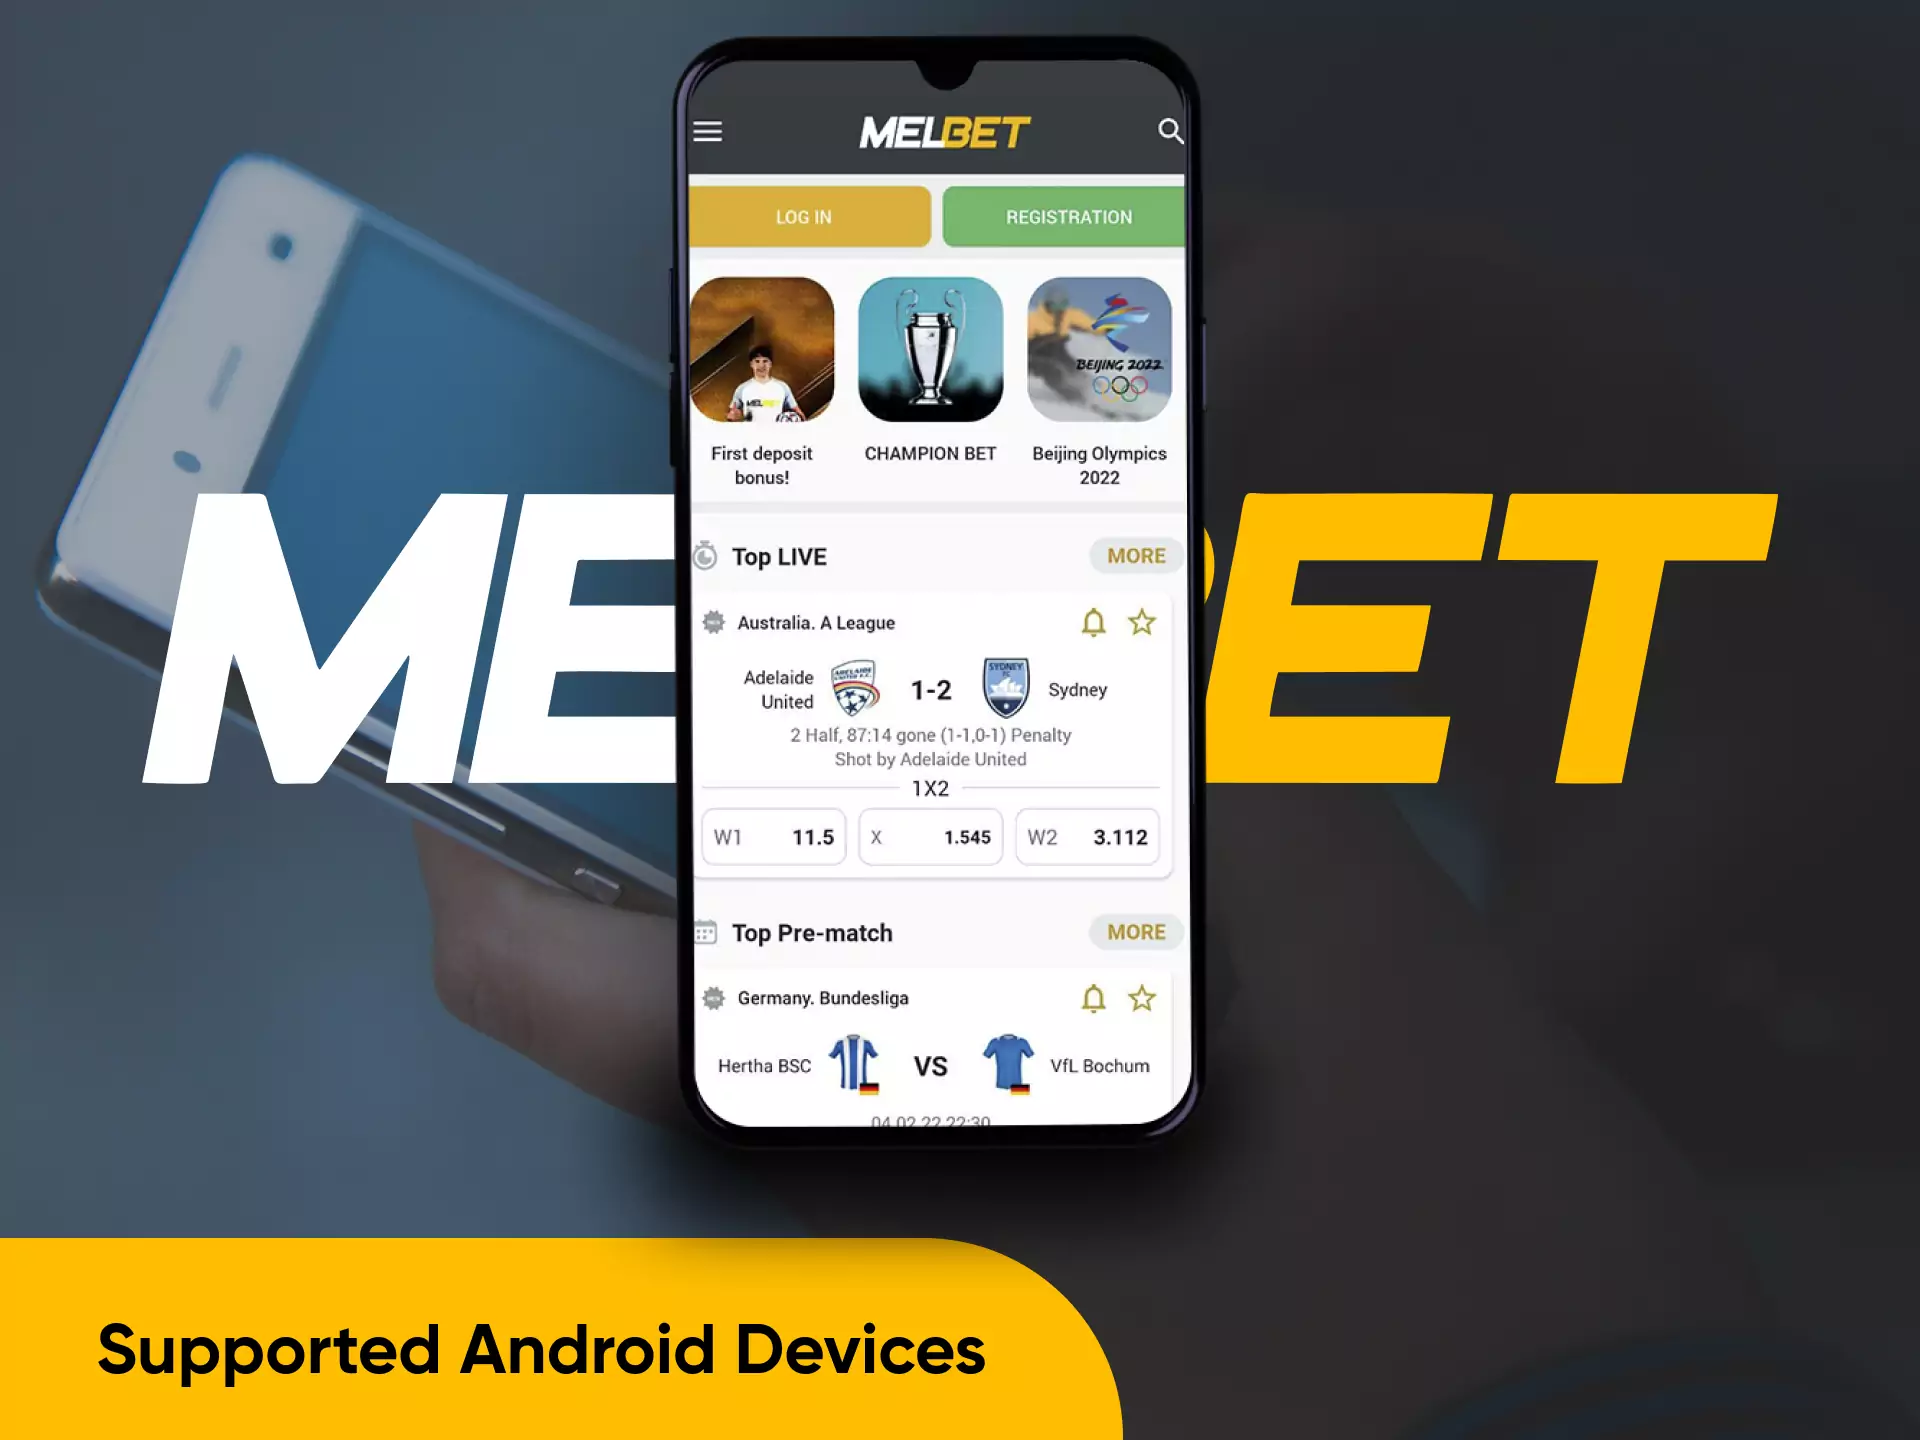 The Melbet app works well on any Android device.